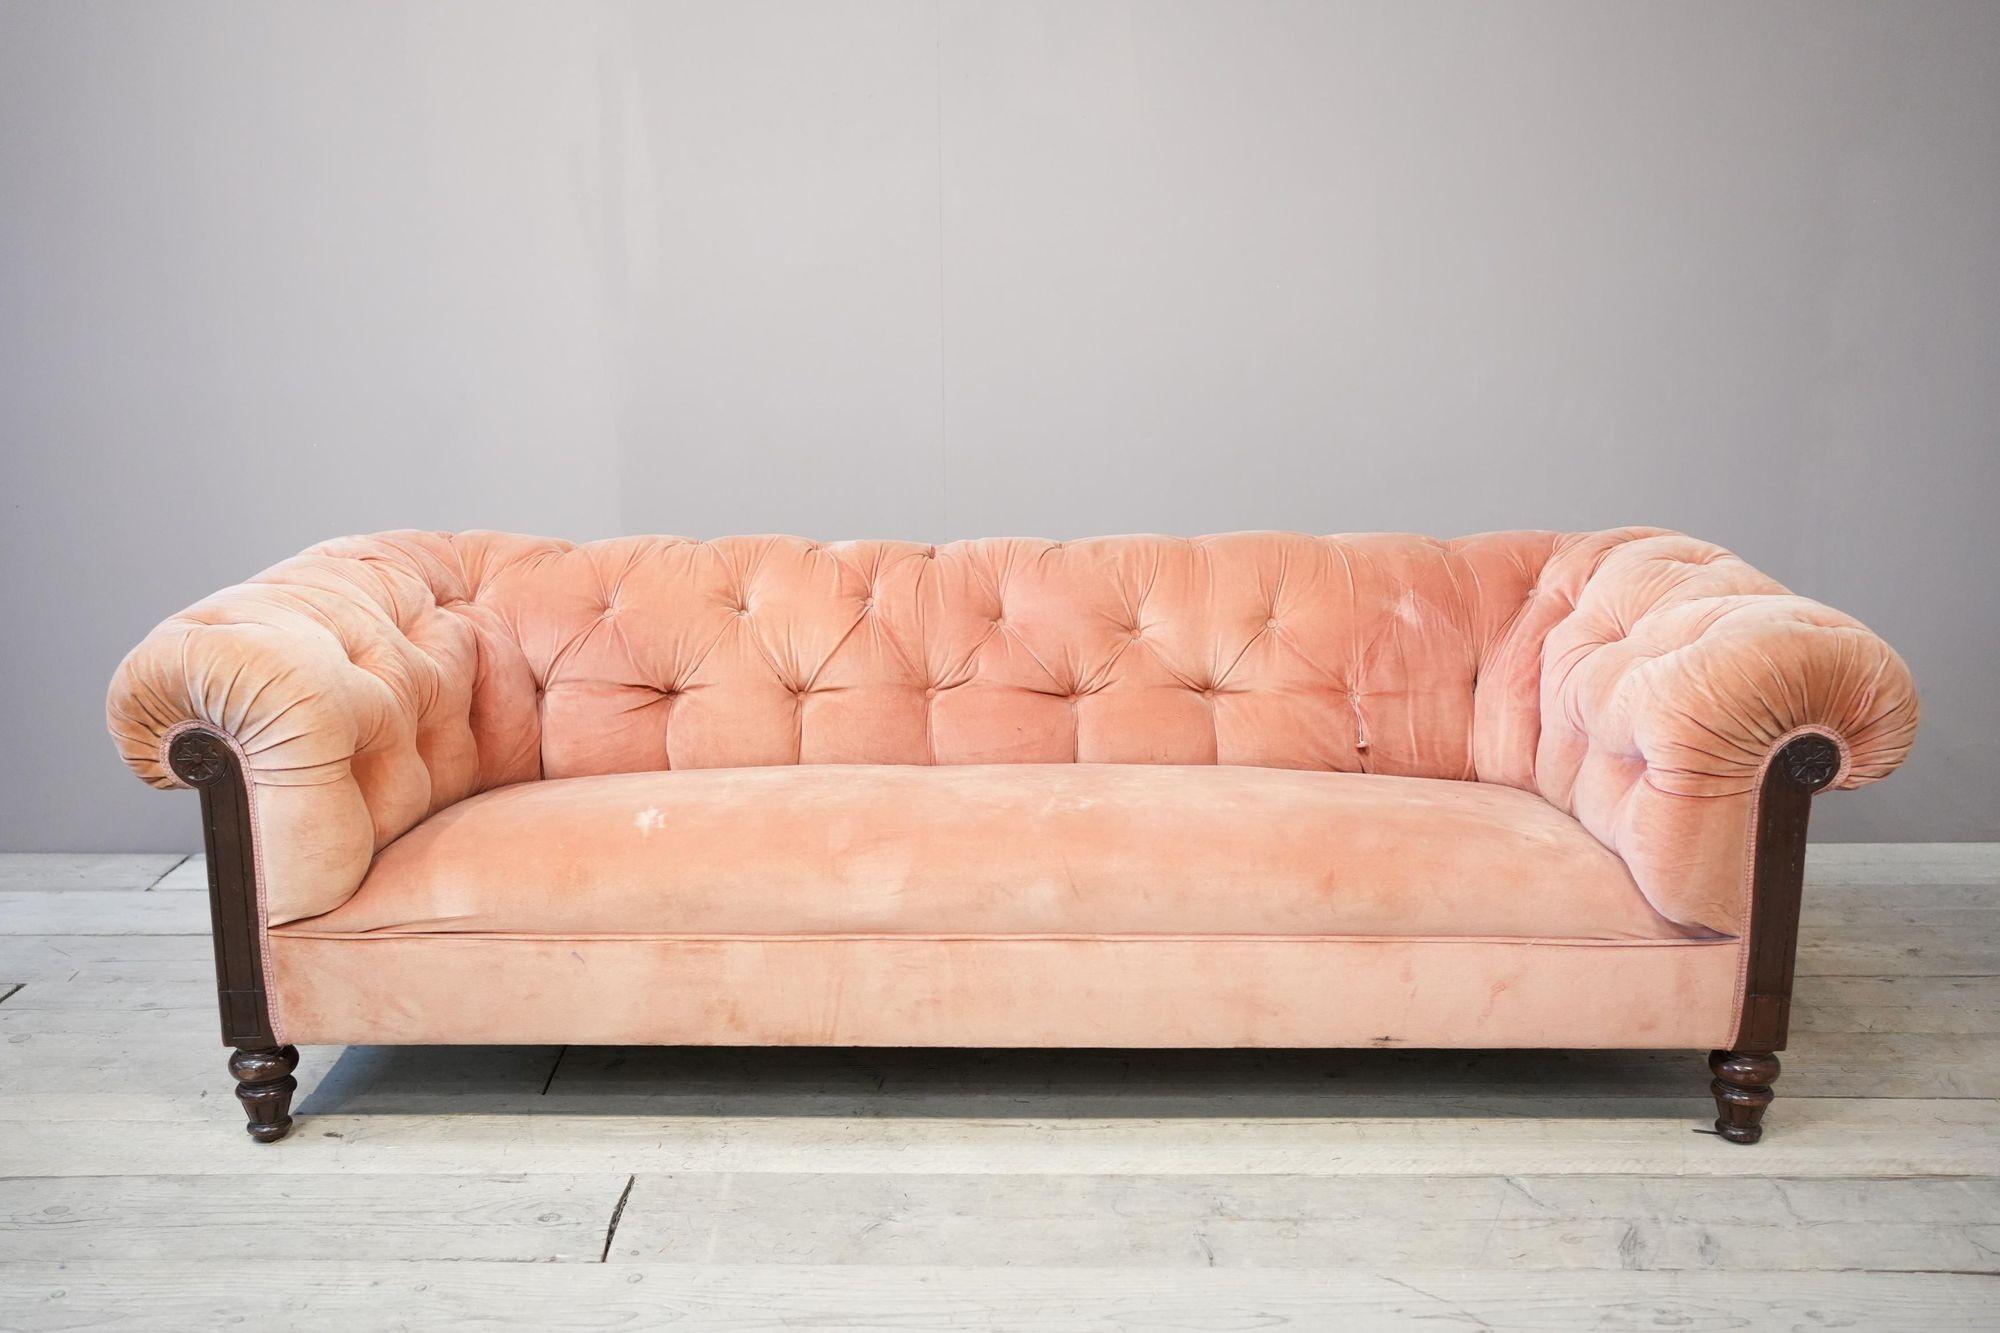 If you would like this sofa upholstered please click yes in the upholstery drop down menu. This would require 15 metres of material. You can supply your own or please get in touch and we will send you the list of fabric companies we work with.
All